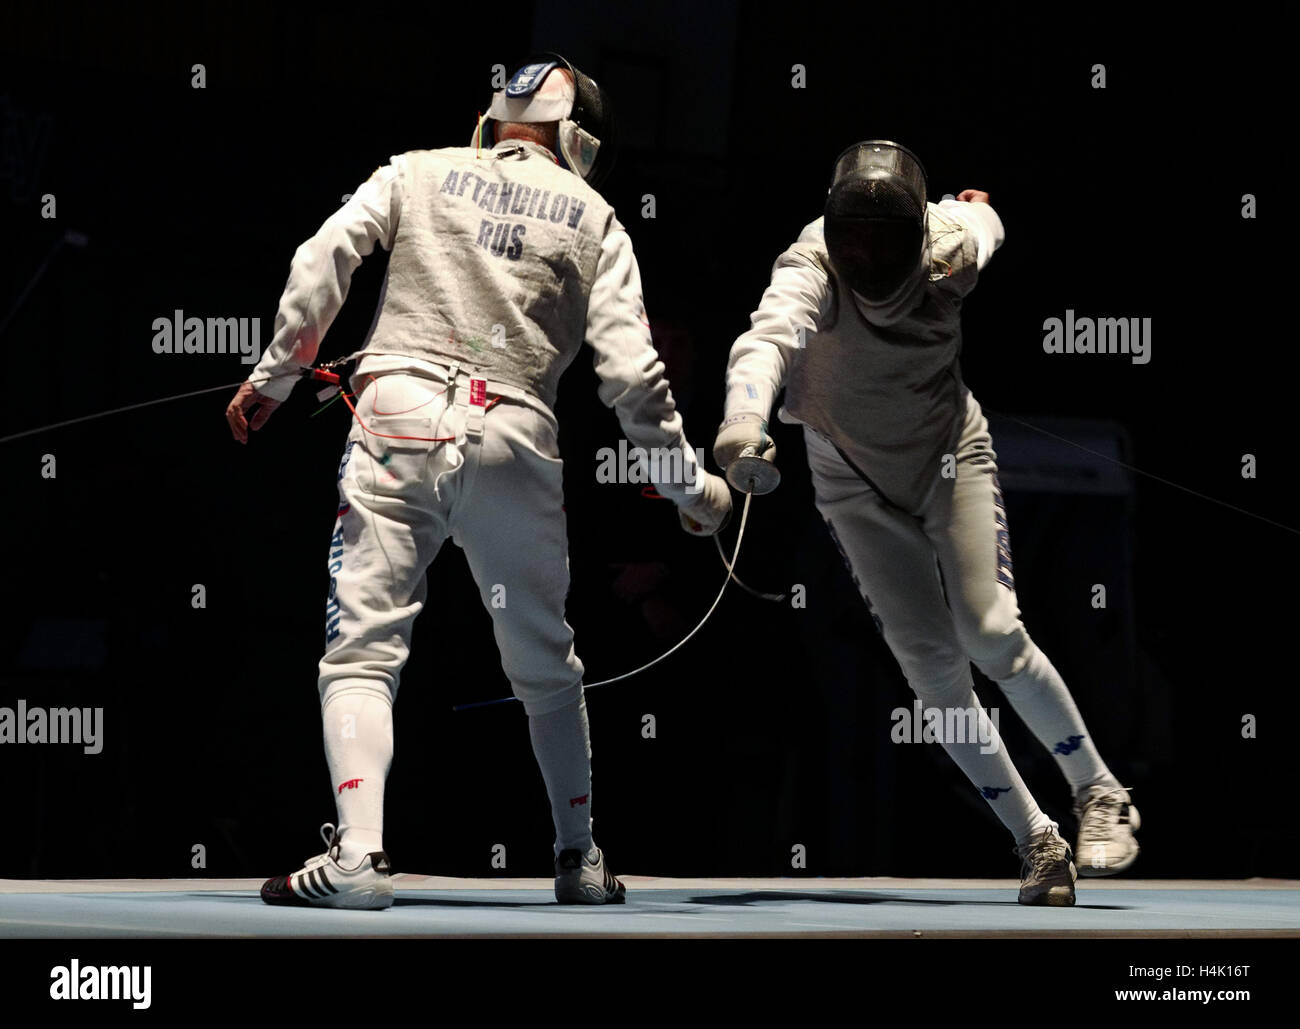 Stralsund, Germany. 13th Oct, 2016. Russian fencer Gari Aftandilov (l) in the final battle with Italy's Fabrizio Filippi at the Fencing World Championships of senior citizens in Stralsund, Germany, 13 October 2016. On the same day, Aftandilov became a world champion in the mens' cohort. Photo: Peter Endig/dpa - NO WIRE SERVICE-/dpa/Alamy Live News Stock Photo